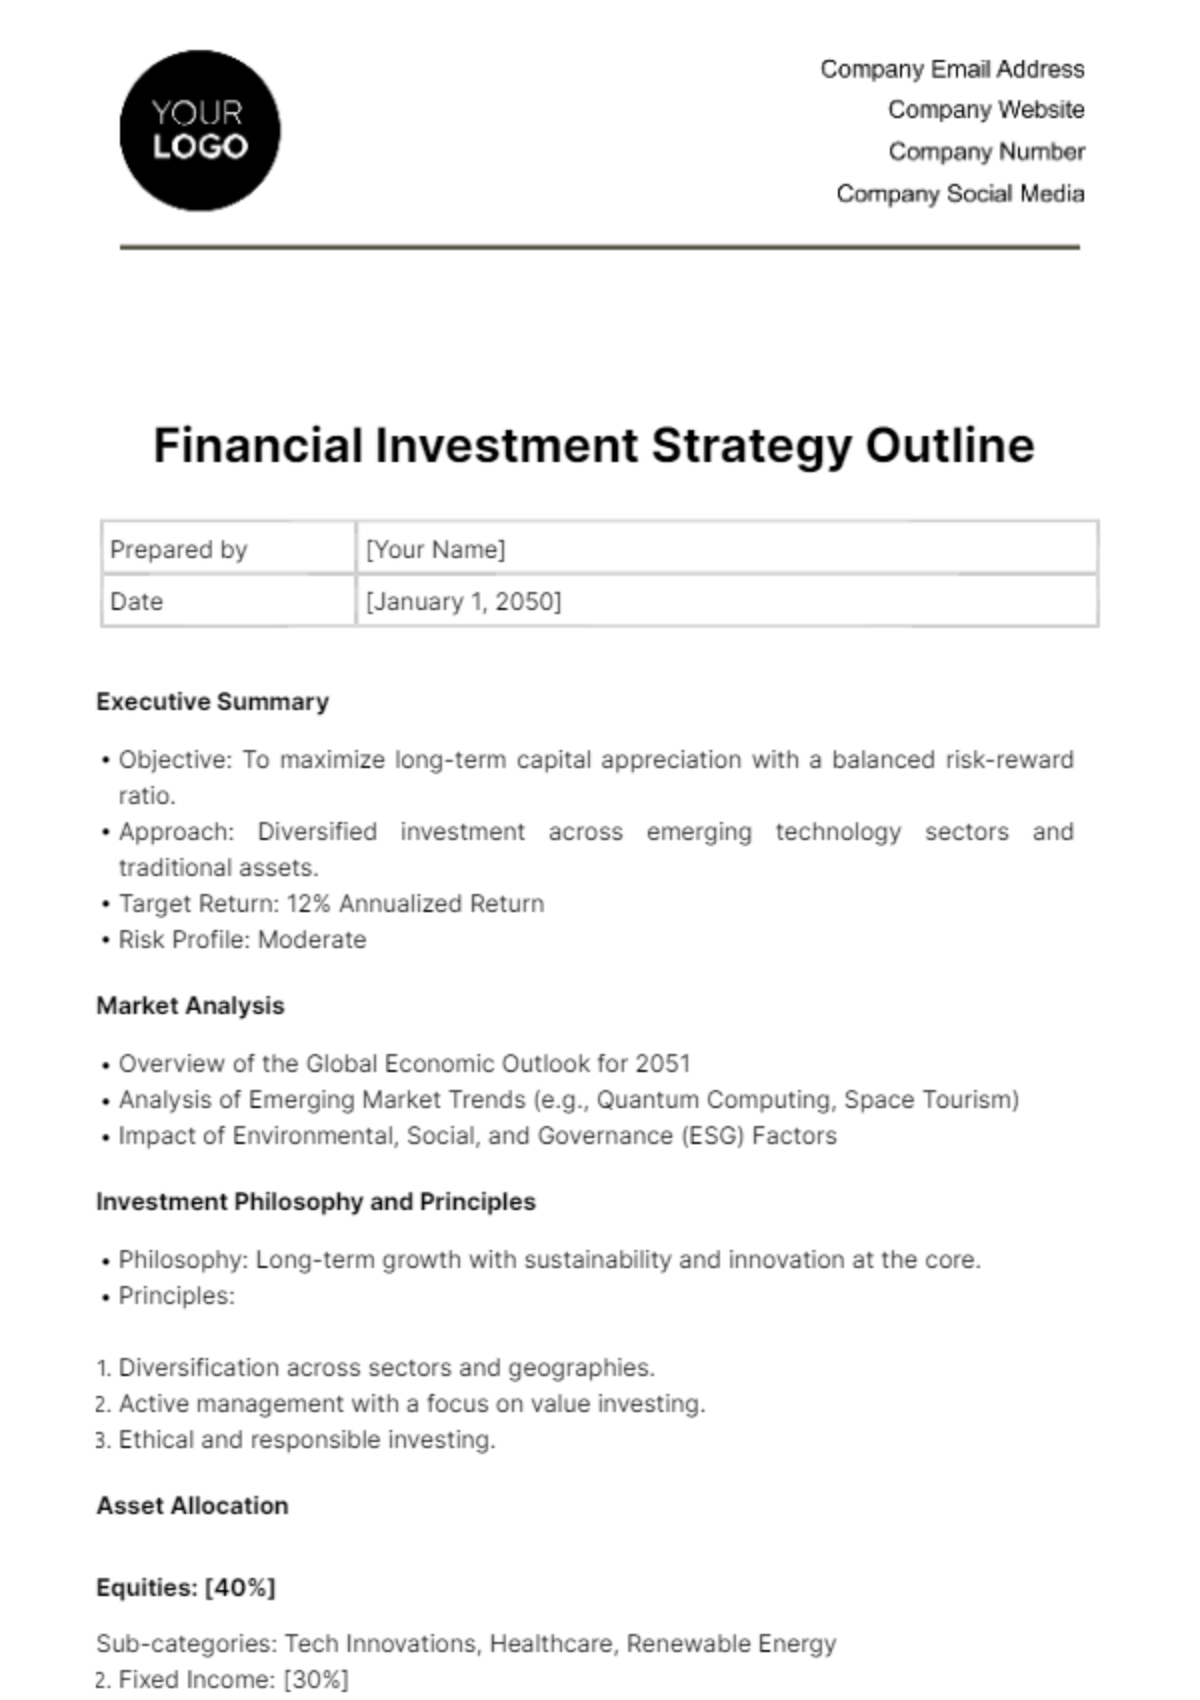 Financial Investment Strategy Outline Template